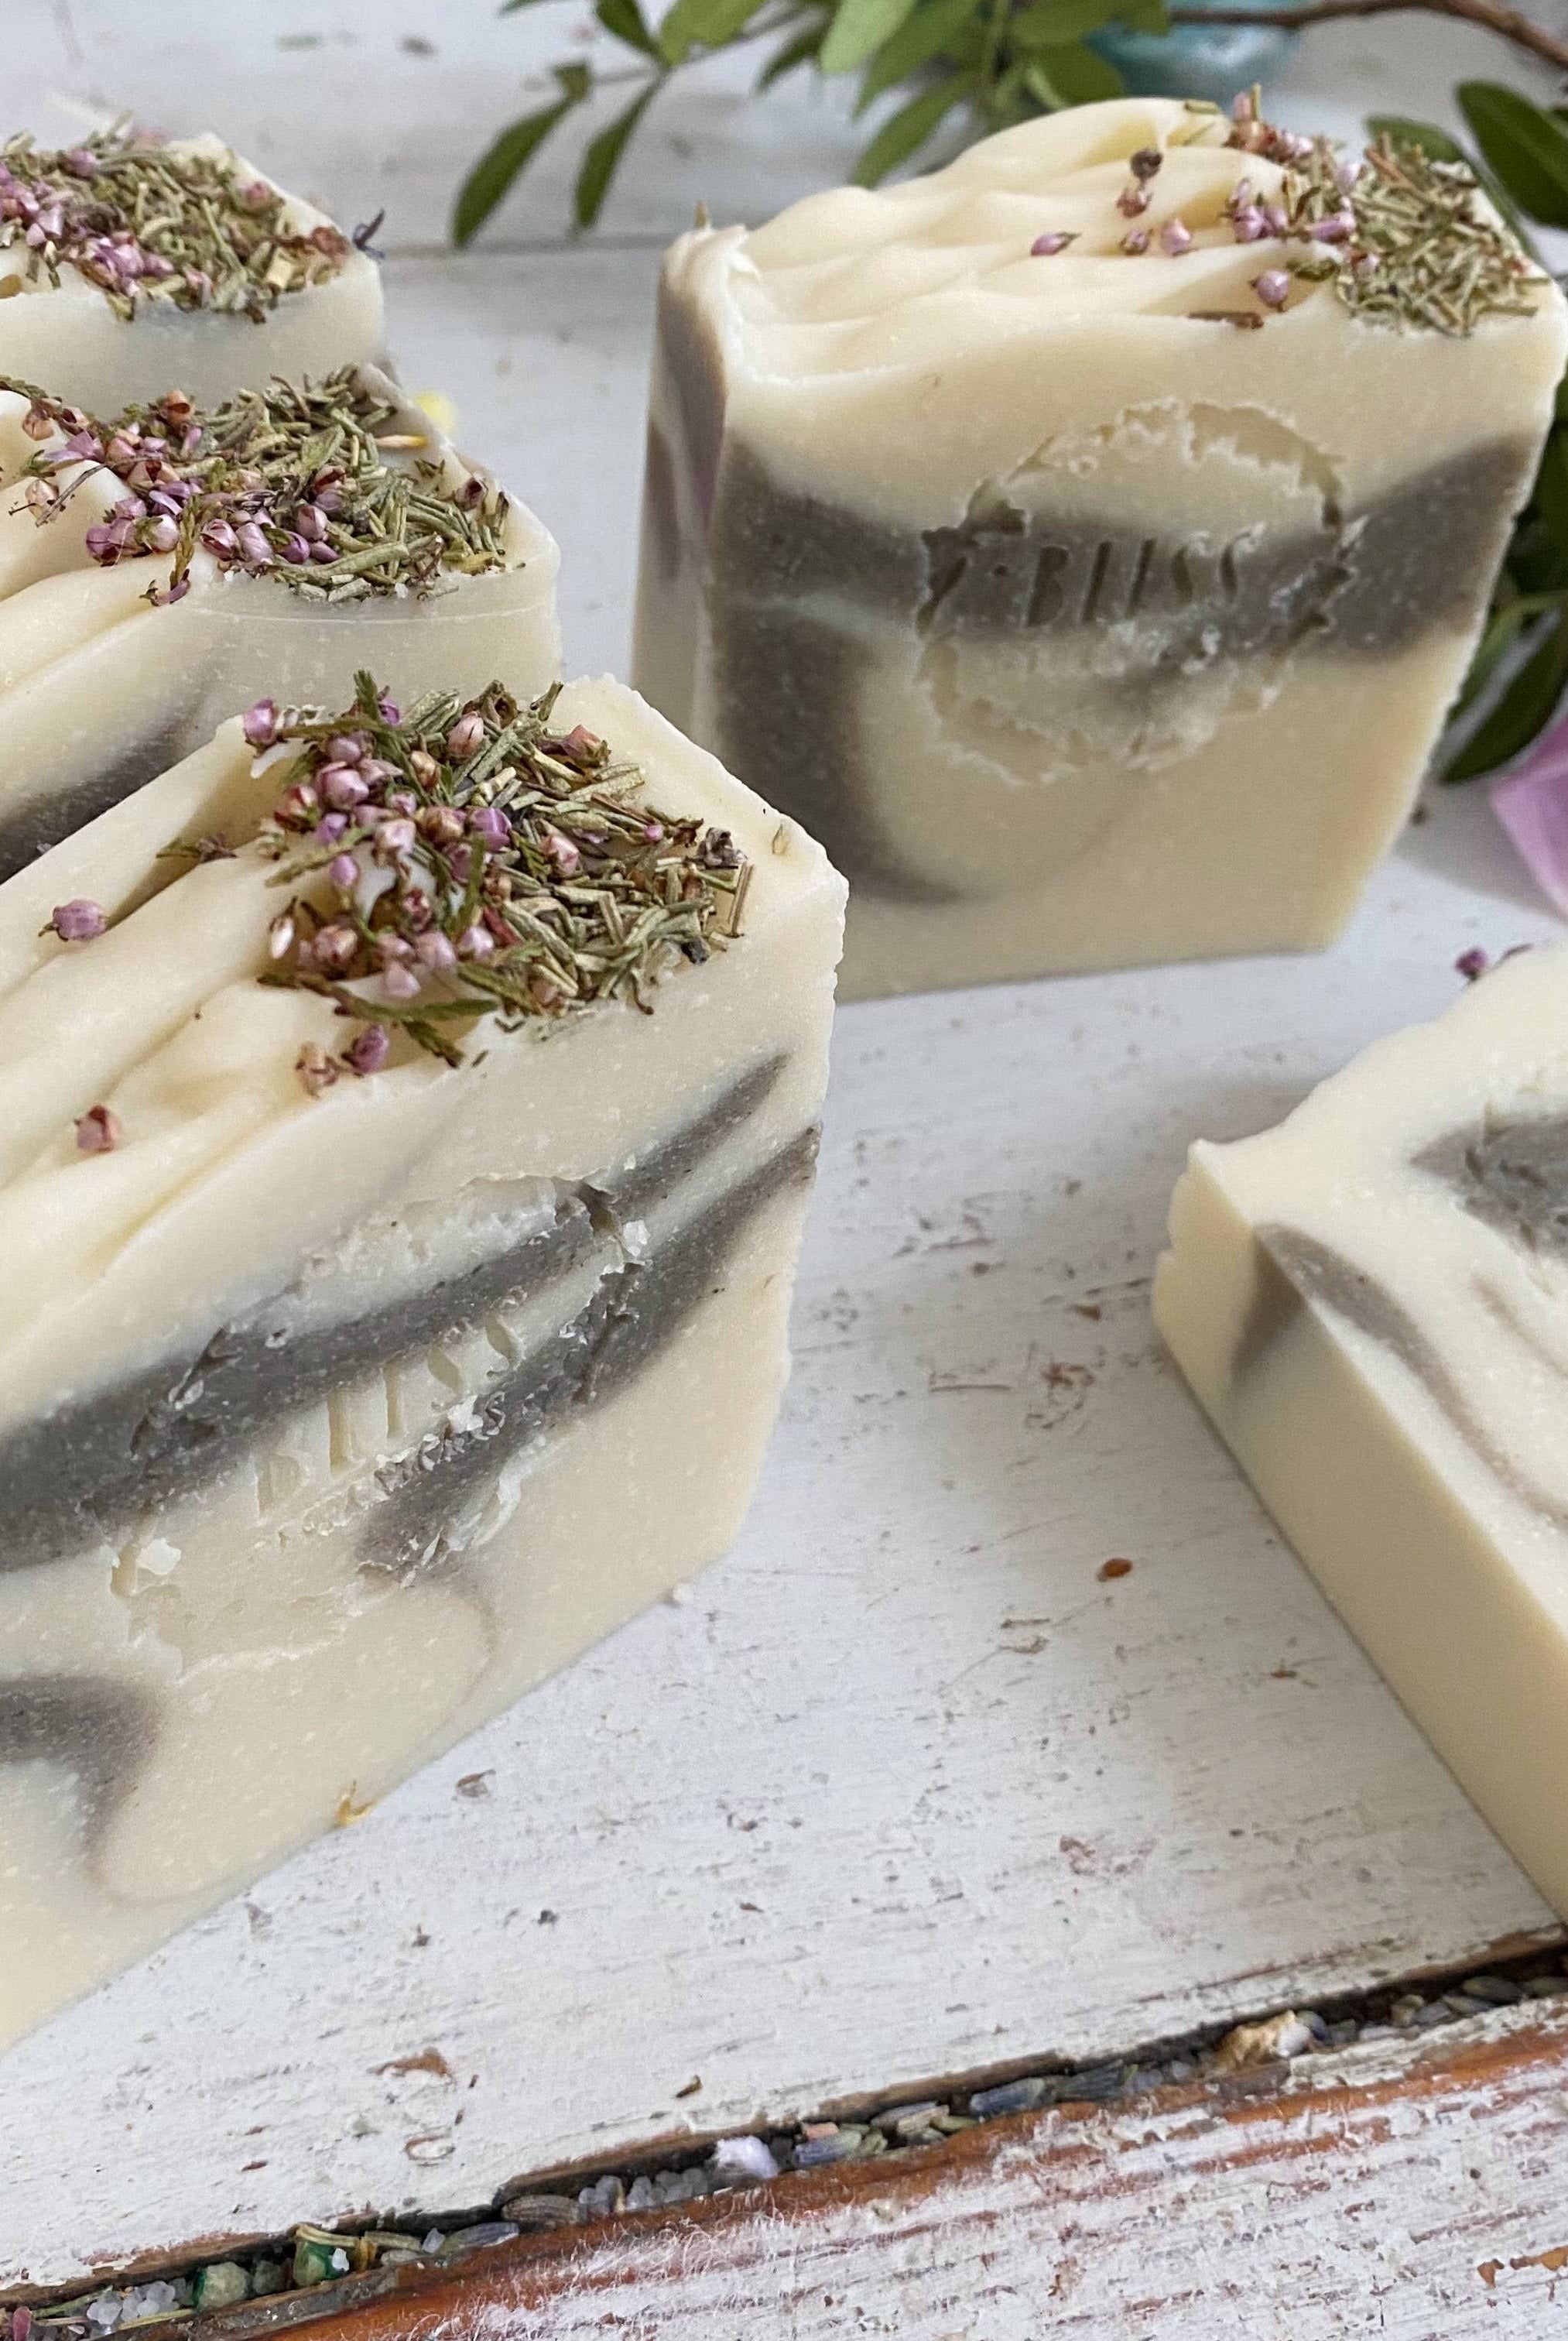 Bliss Botanicals Forest Fairy Soap bars with lavender buds and aromatherapy essential oil displayed alongside pink petals and green leaves, featuring a label titled "forest fairy" on a rustic white background.